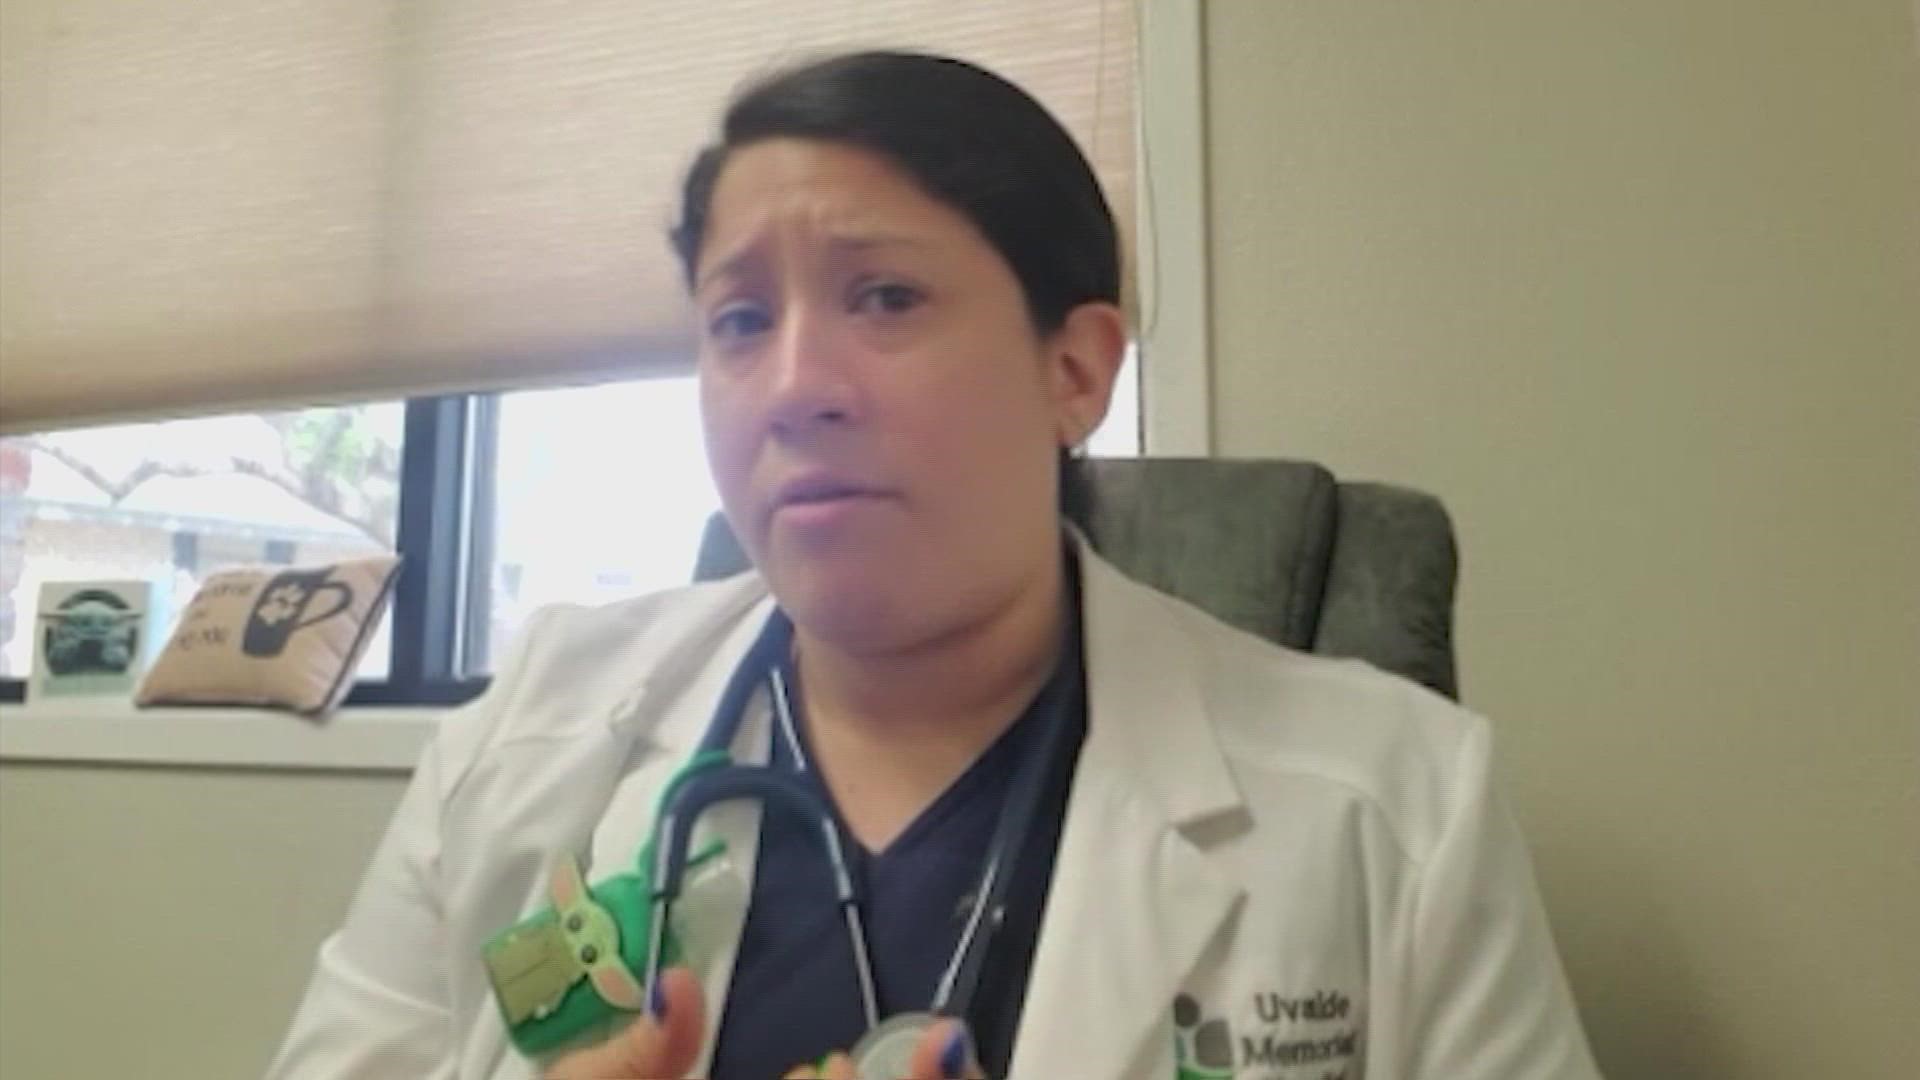 Dr. Cecilia Murillo responded to the shooting at Robb, and also to the mass shooting in El Paso. She said many in the community are not taking care of themselves.